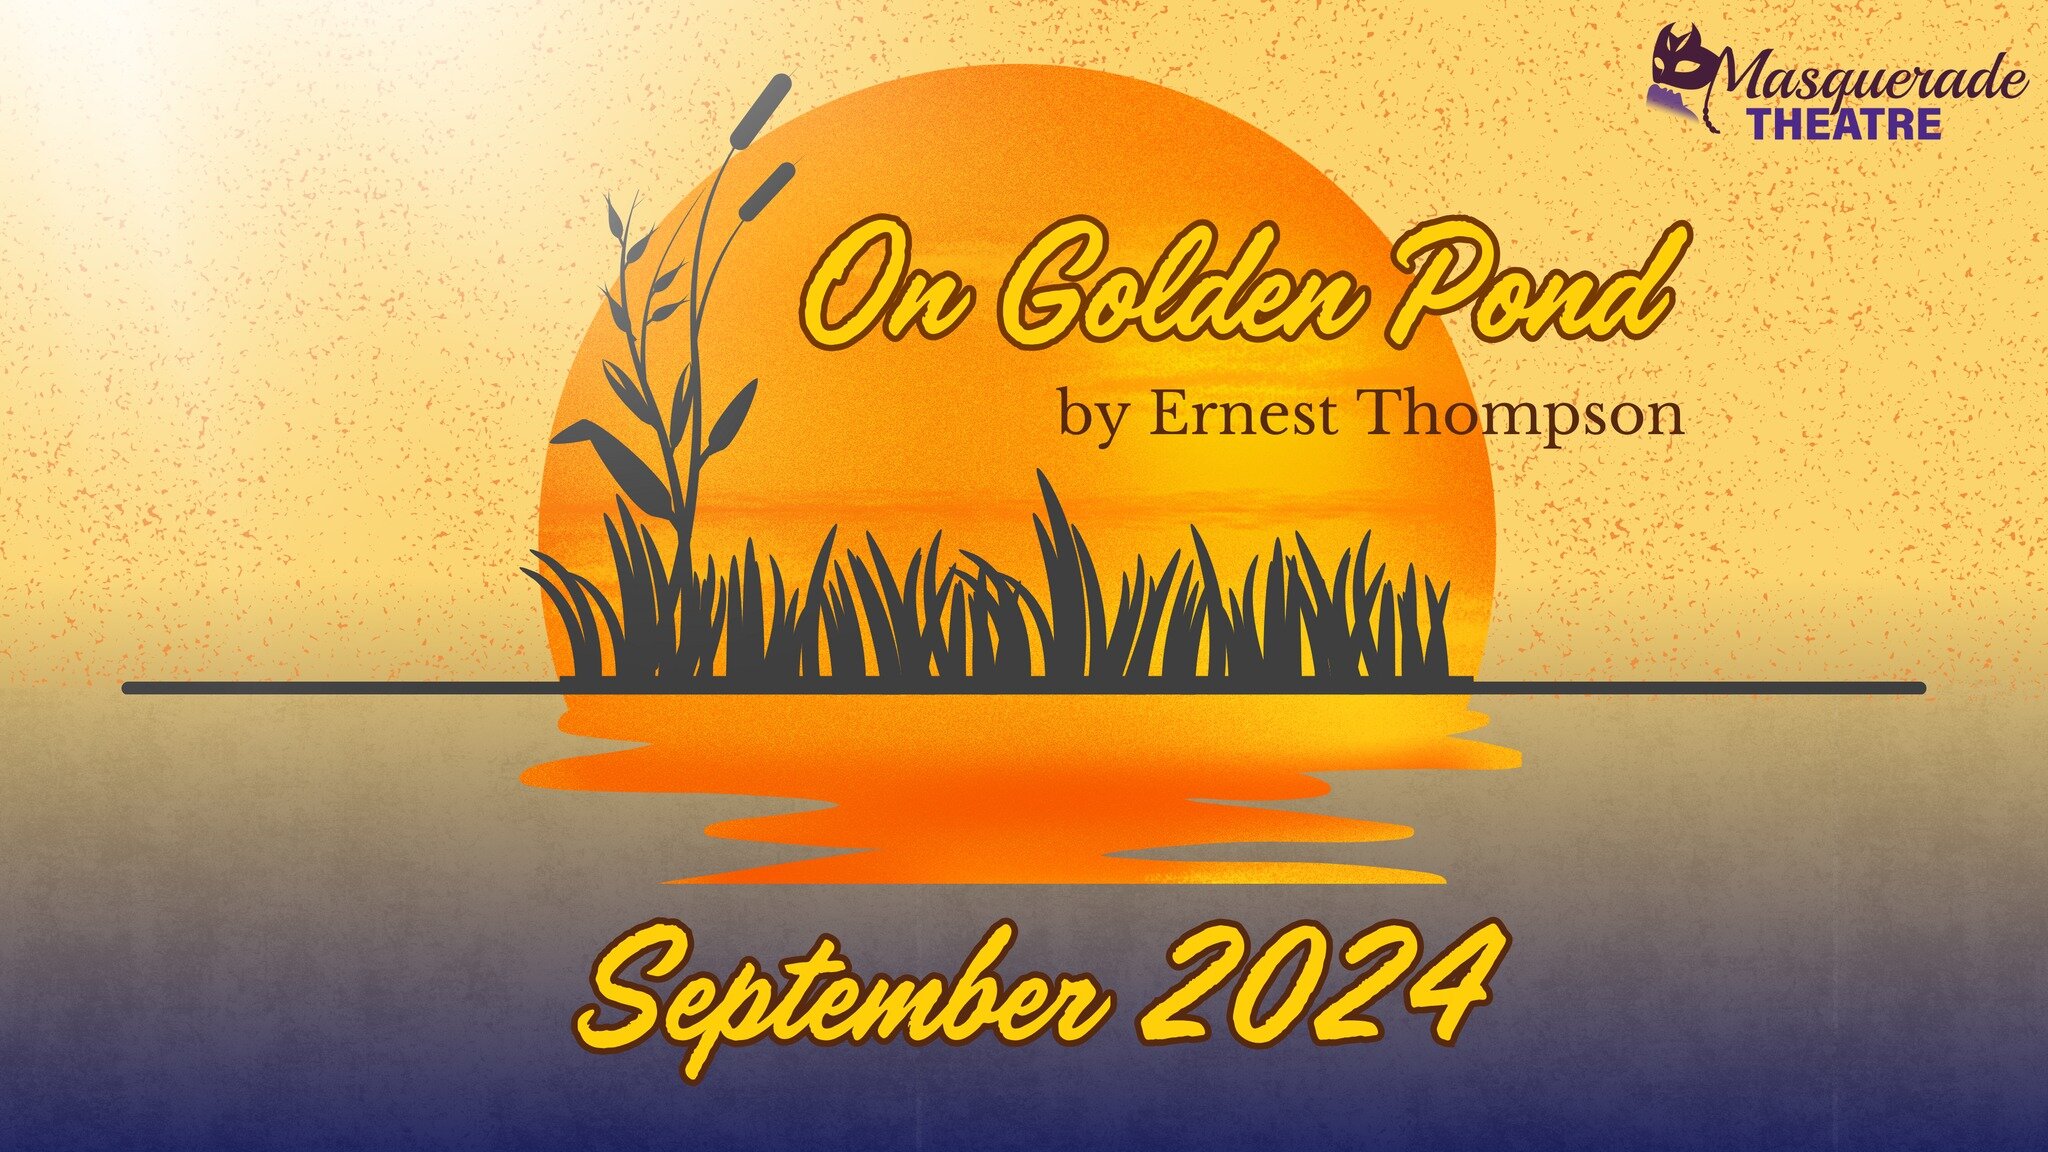 Show Reveal #1!

&quot;On Golden Pond&quot; by Ernest Thompson
Directed by Scott Reynolds

On Golden Pond is a humorous and heartwarming play about love, reconnection, and family. After an unexpected relationship blooms, a family reunites during an u